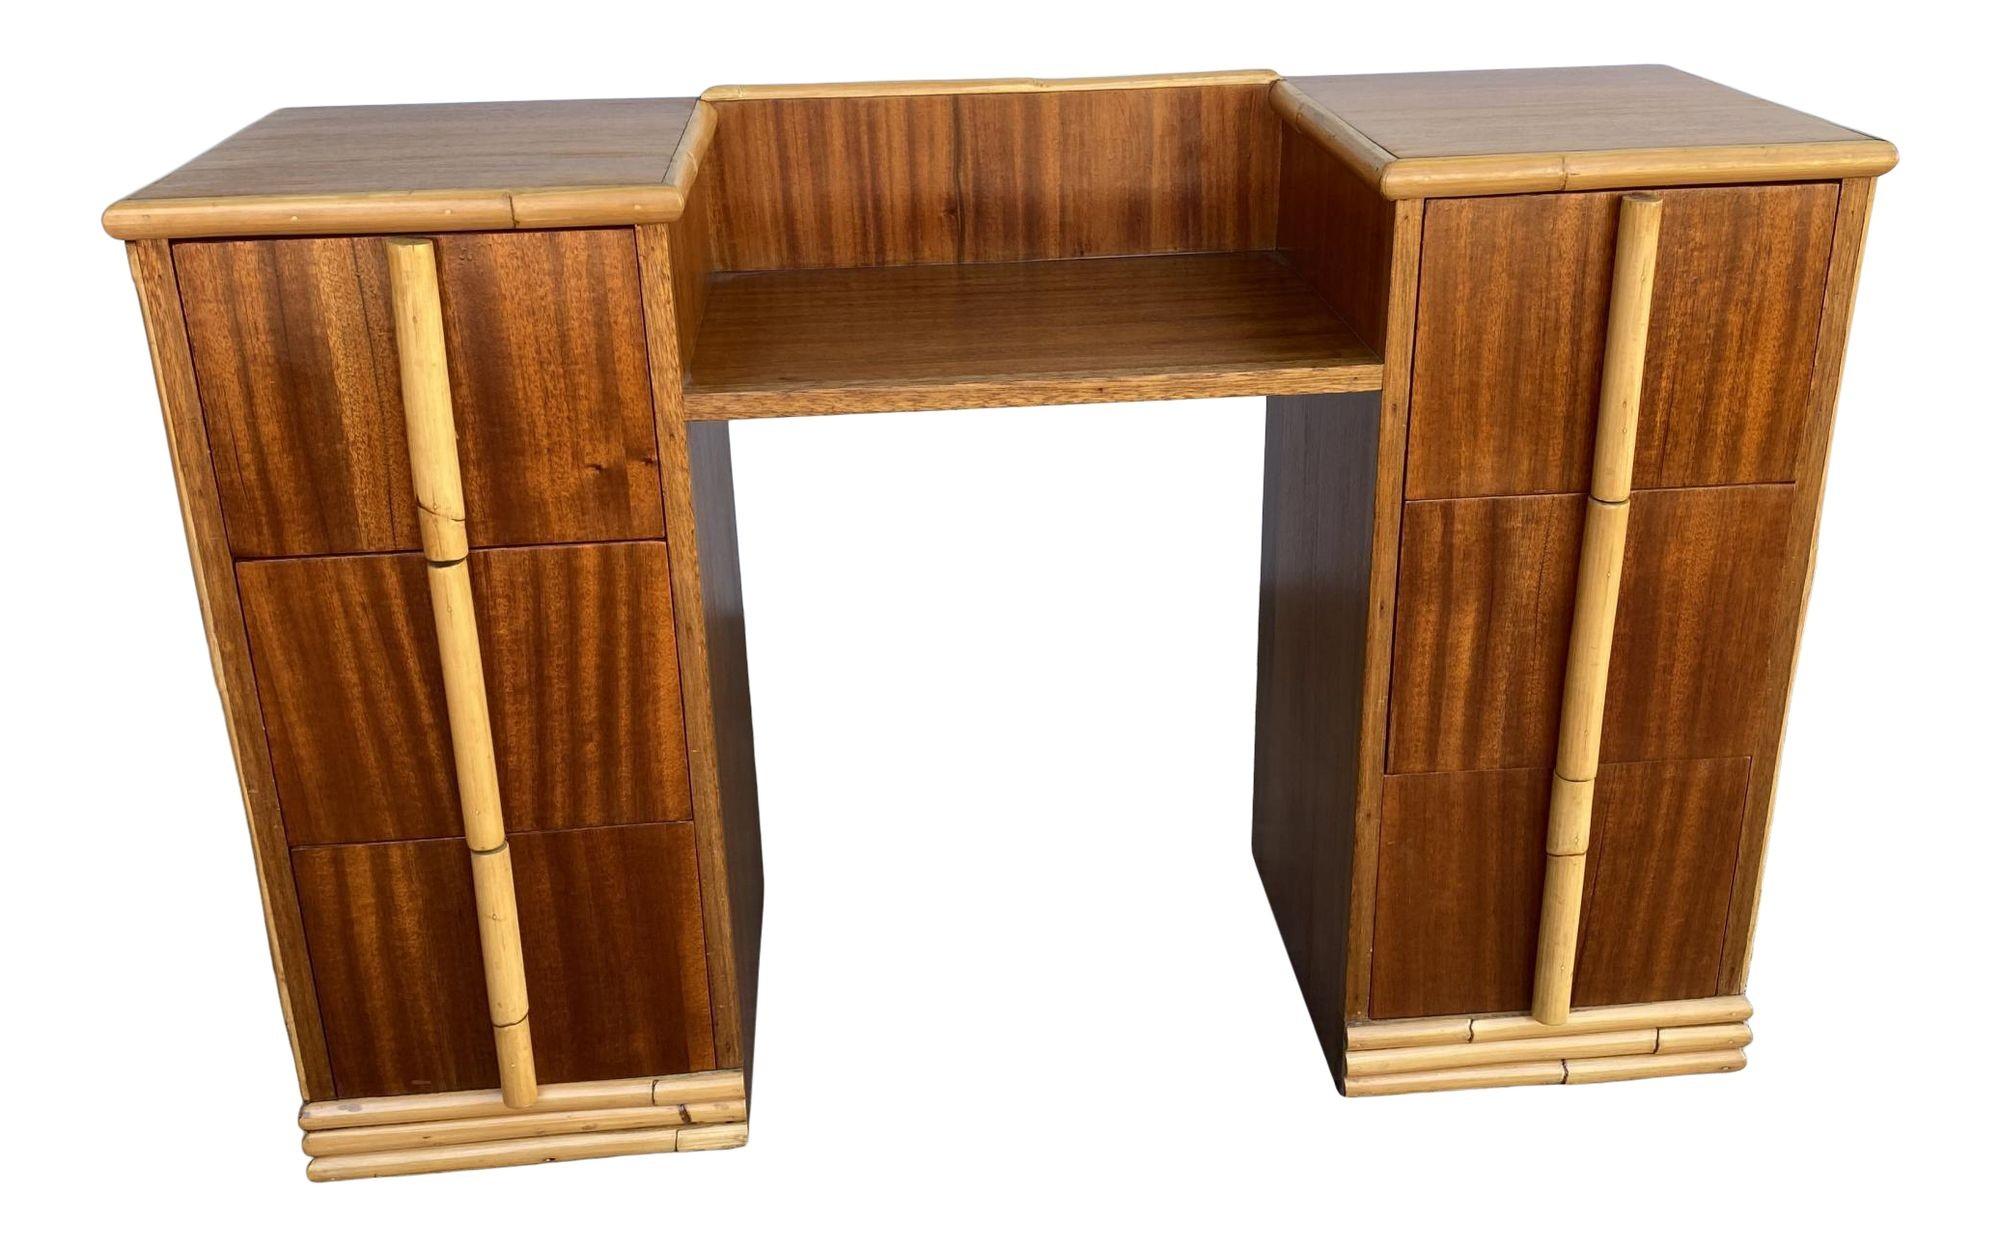 Original 1940s midcentury mahogany vanity with rattan accents. The vanity features an extensive rattan trim along the mahogany surface and custom made rattan pulls.

Restored to new for you.

All rattan, bamboo, and wicker furniture has been